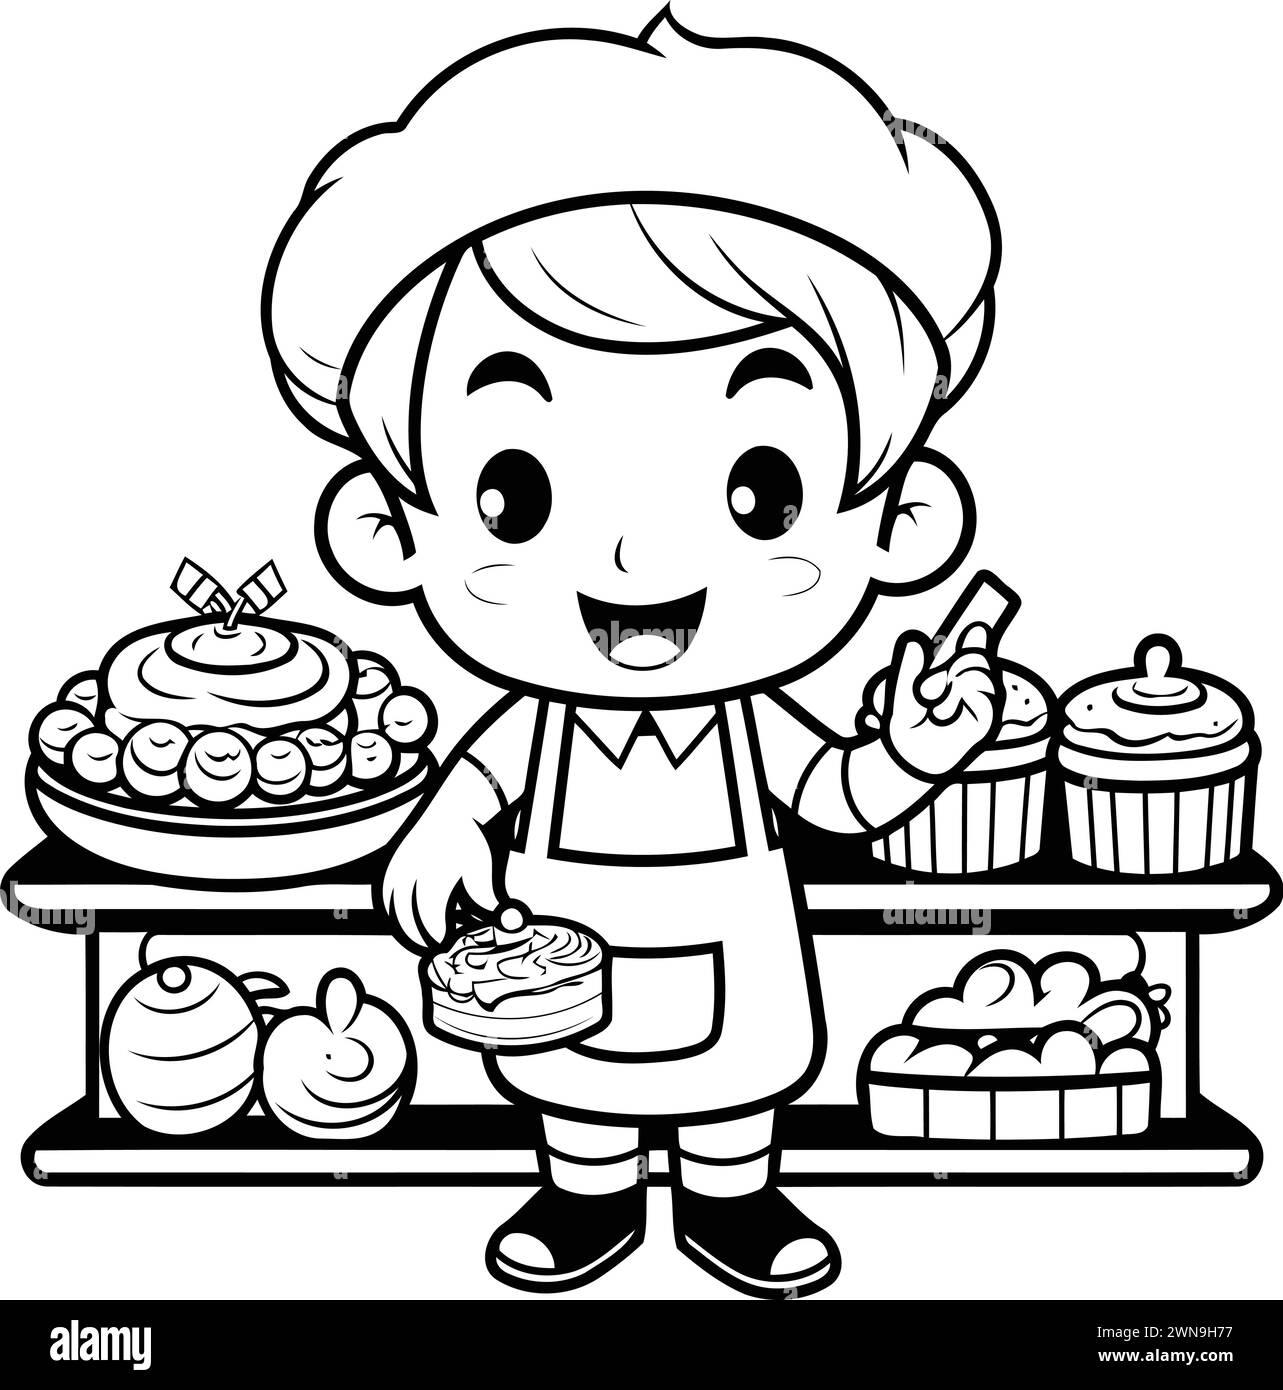 Black and White Cartoon Illustration of Cute Little Boy Chef with Cake for Coloring Book Stock Vector